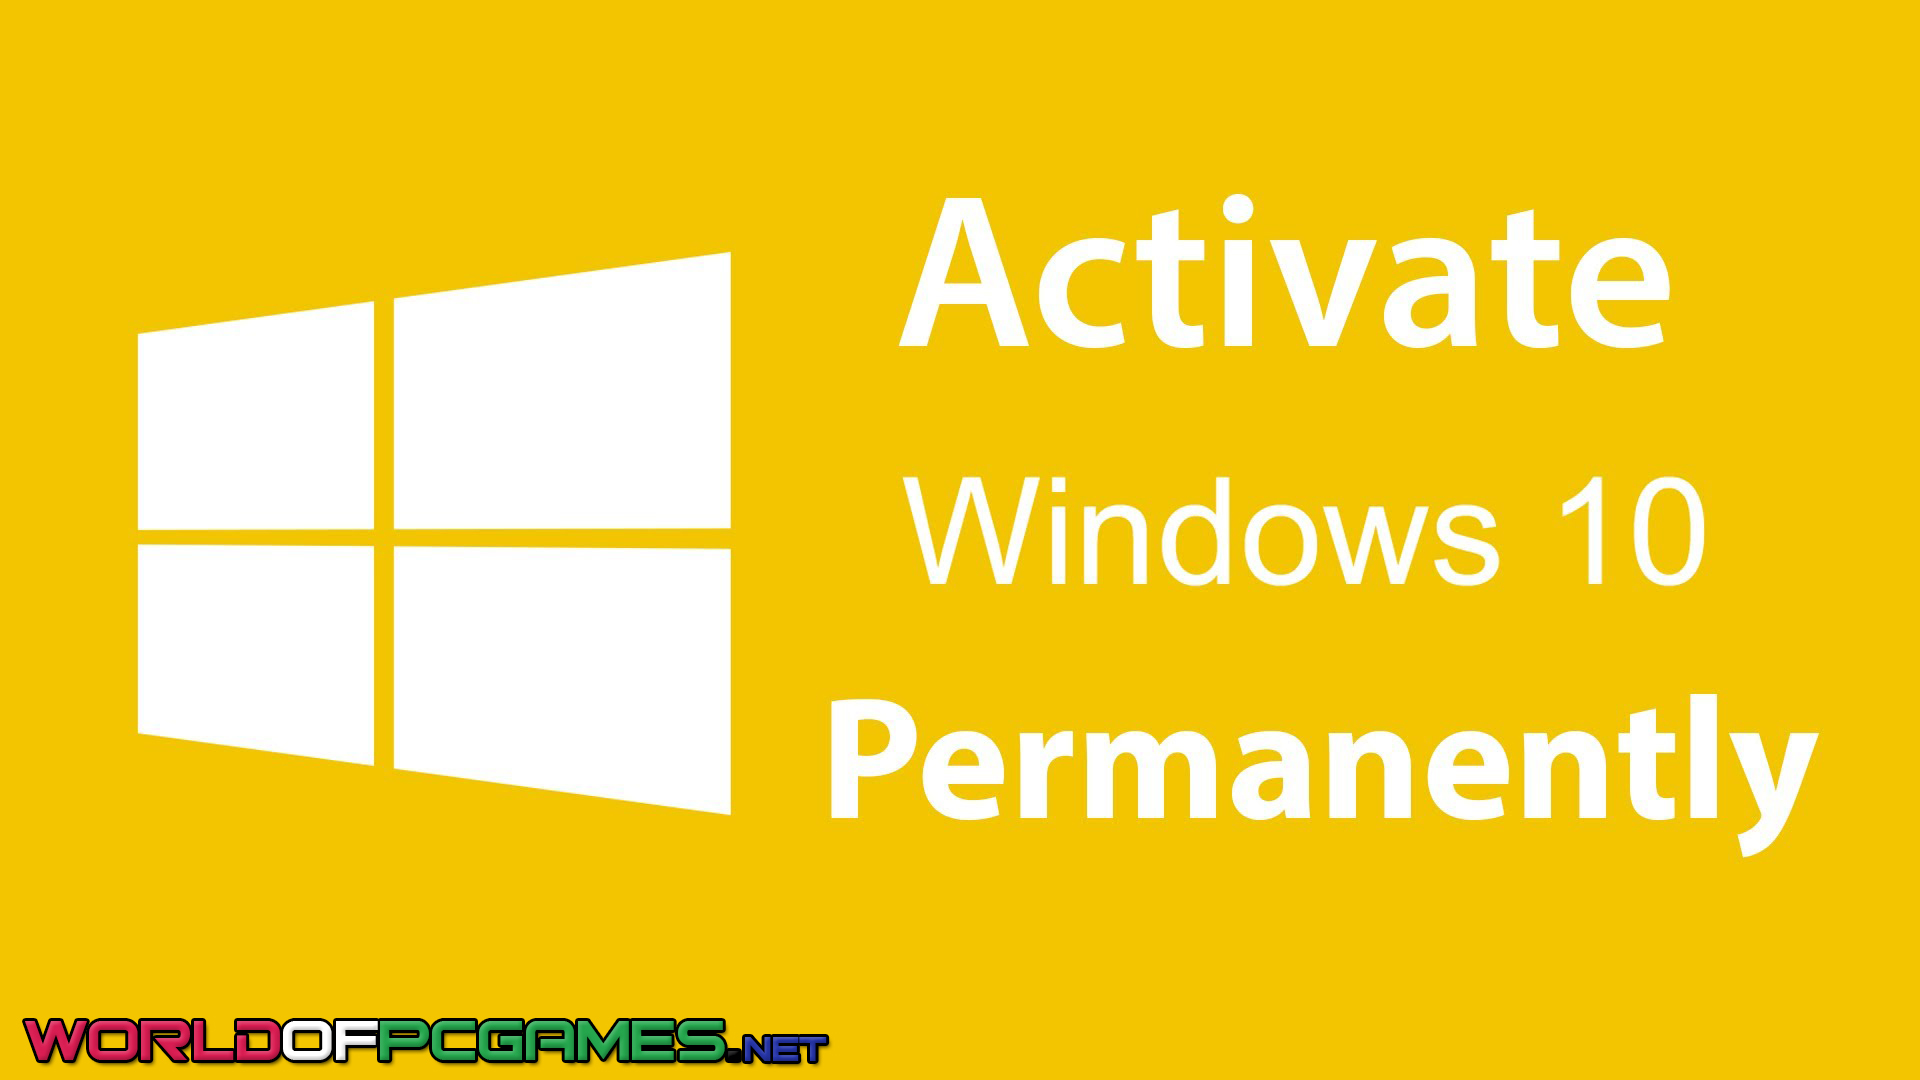 Windows 10 Activator Free Download By worldof-pcgames.net